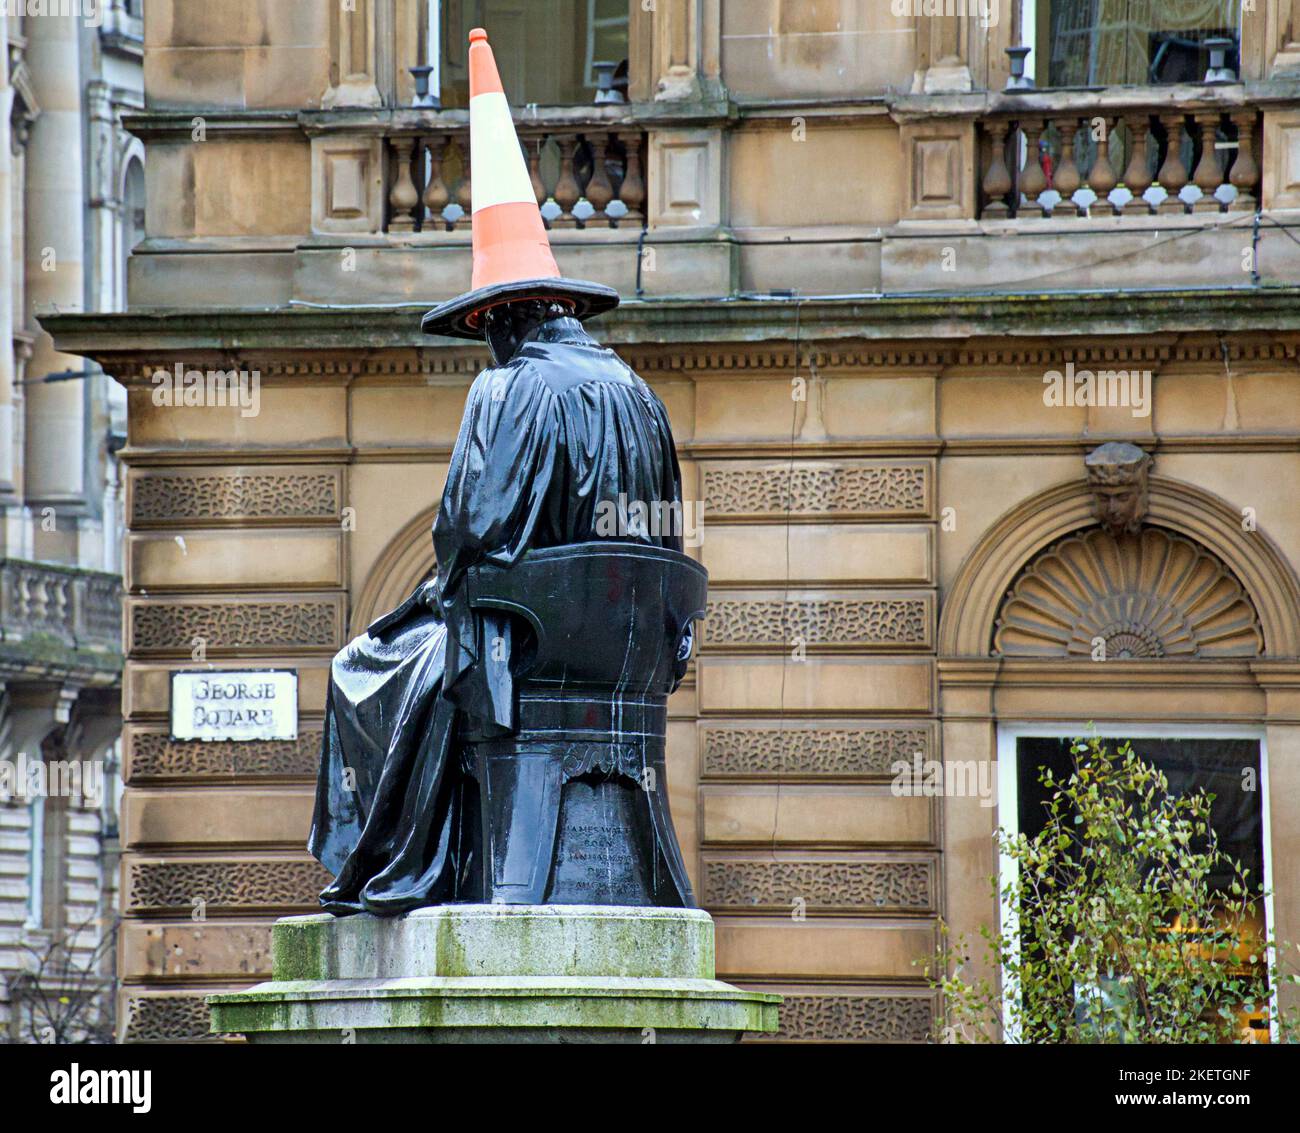 James watt statue in George square given the iconic local  cone head treatment and looking like a dunce Stock Photo